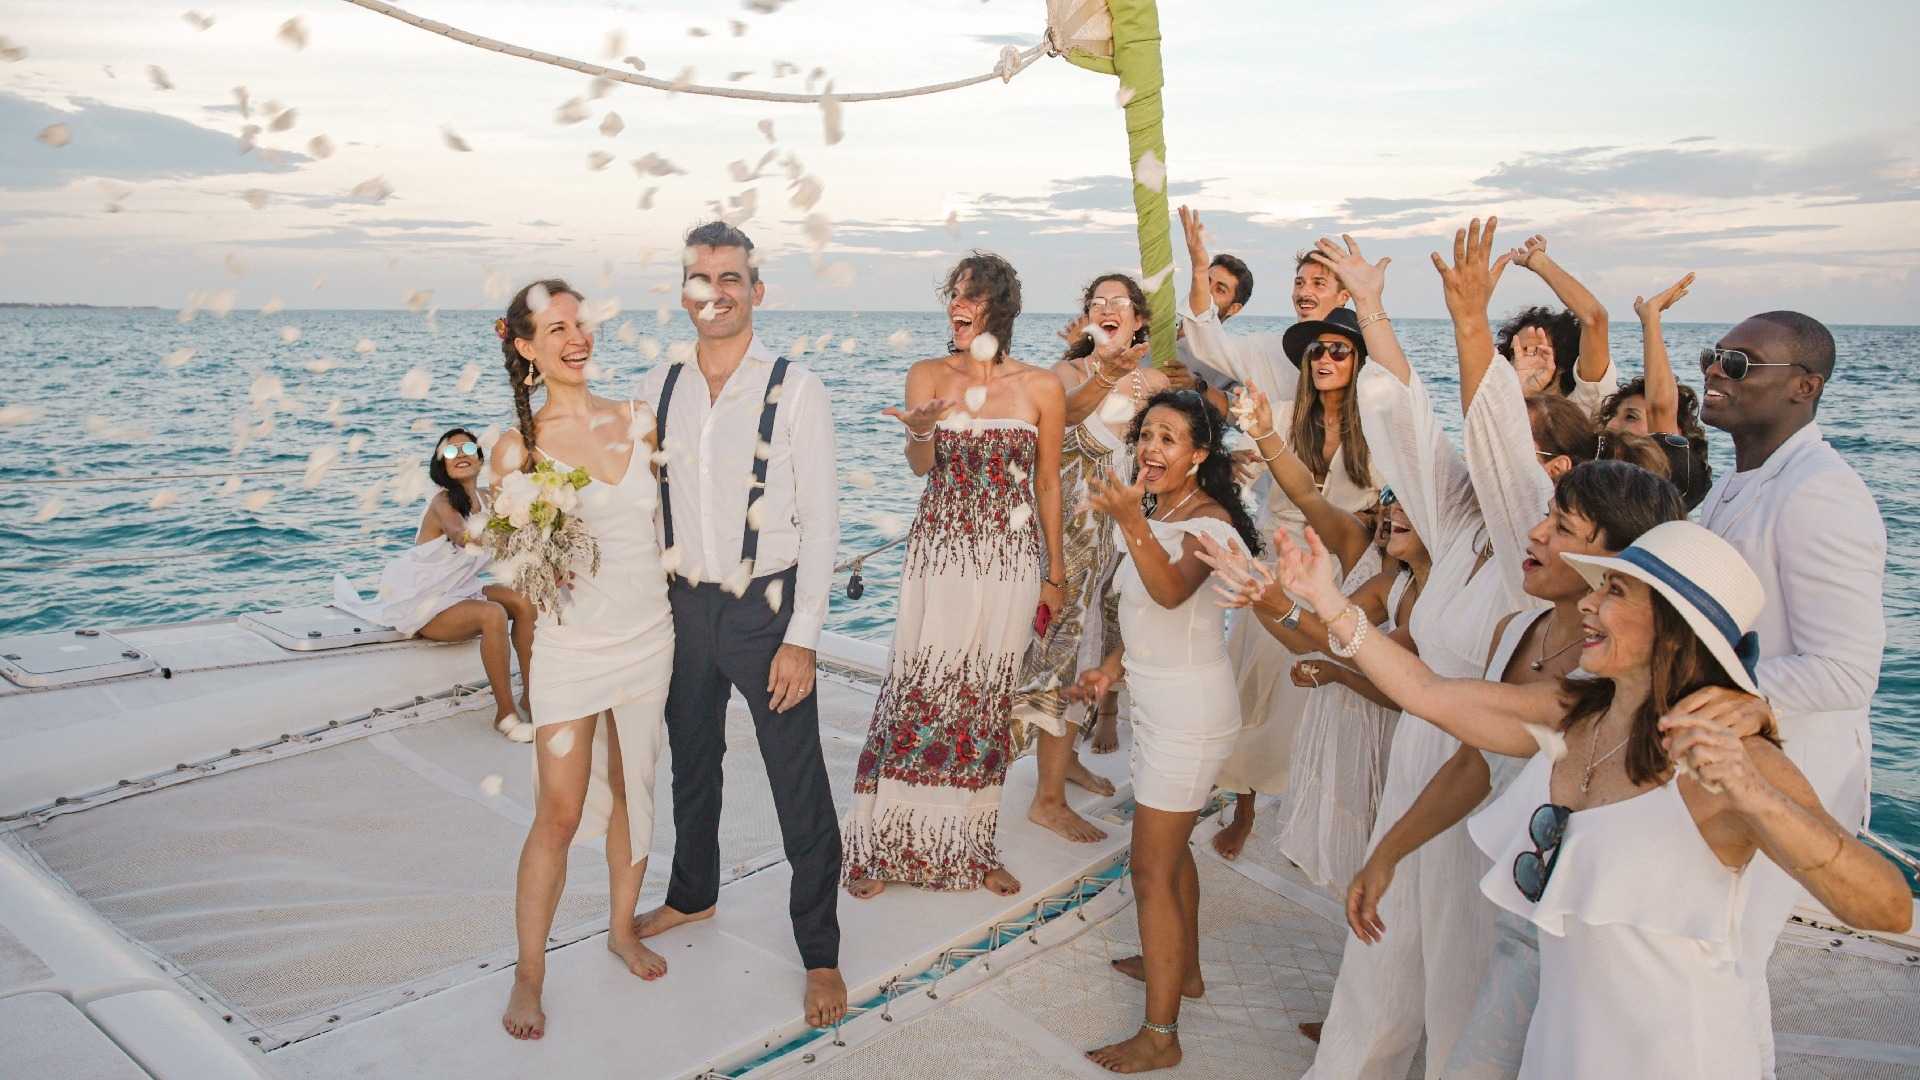 22 Low-Res  - Planning a wedding in Cancun - Cancun Sailing best weddings venues-1-1